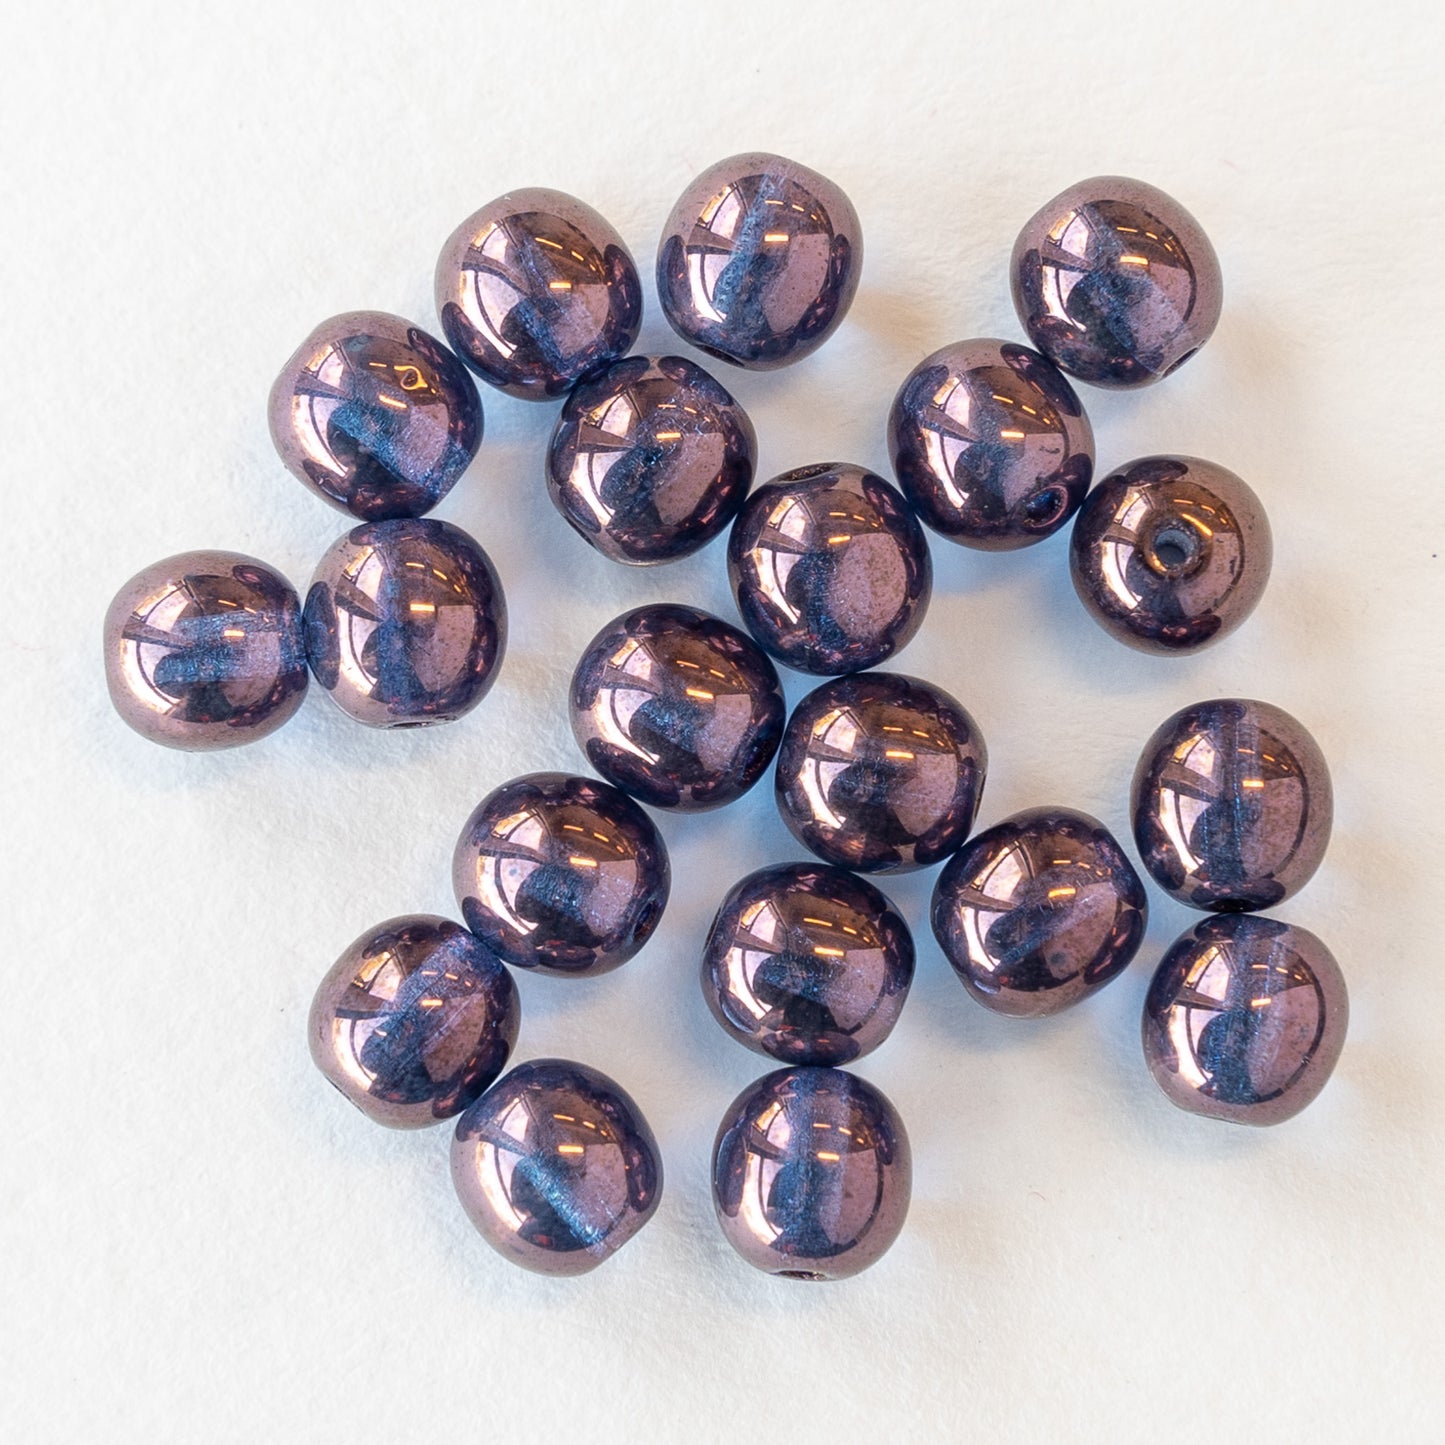 6mm Round Glass Beads - Amethyst Luster - 42 beads